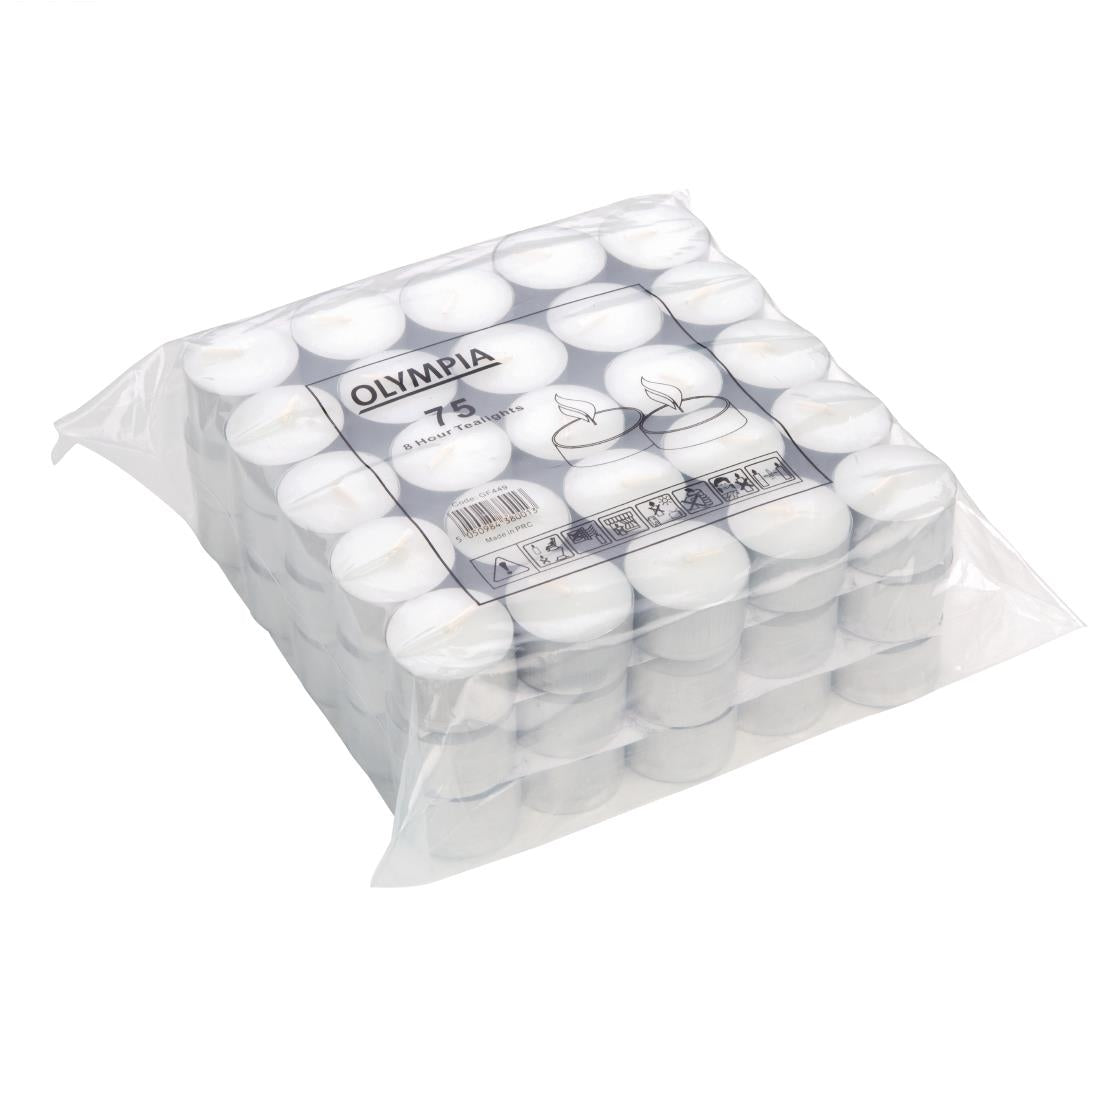 GF449 Olympia 8 Hour Tealights (Pack of 75) JD Catering Equipment Solutions Ltd